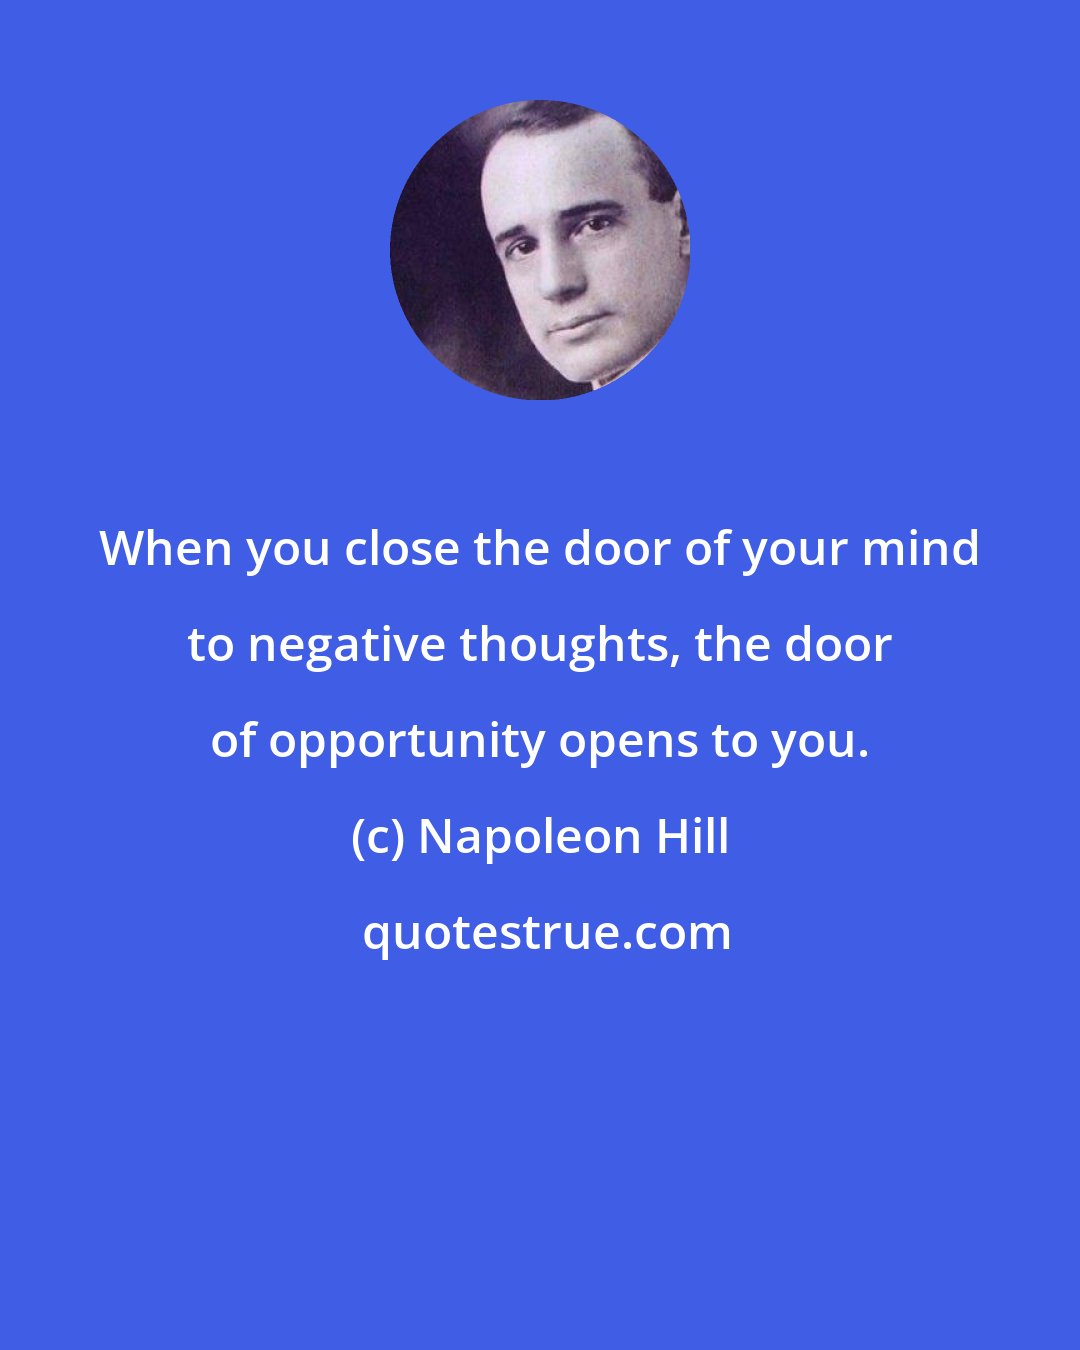 Napoleon Hill: When you close the door of your mind to negative thoughts, the door of opportunity opens to you.